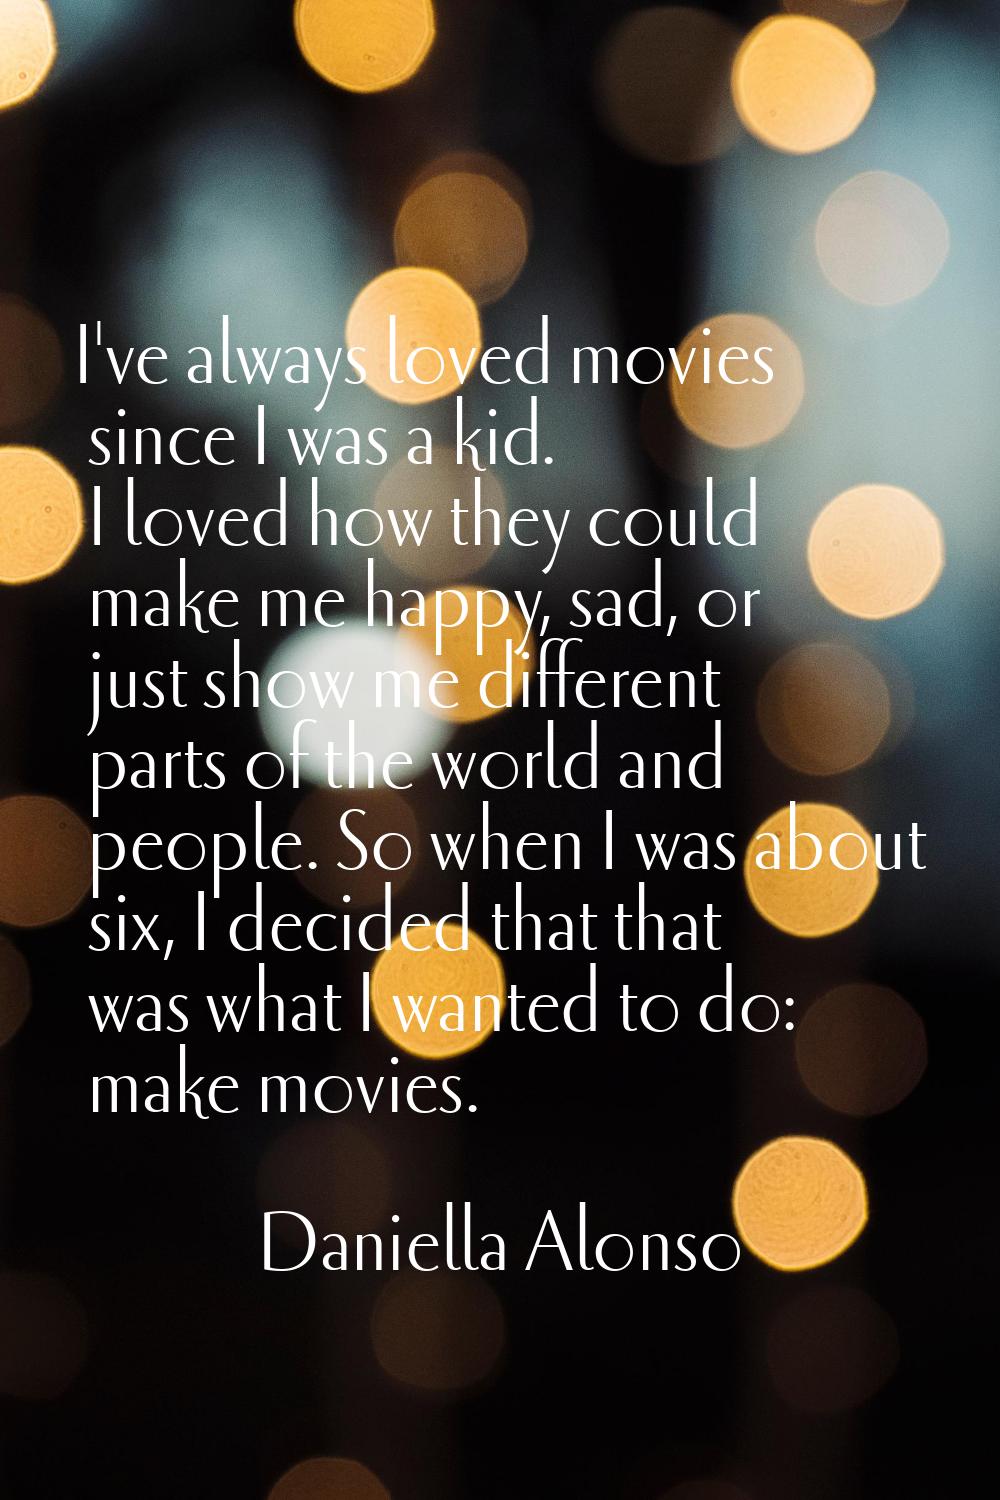 I've always loved movies since I was a kid. I loved how they could make me happy, sad, or just show